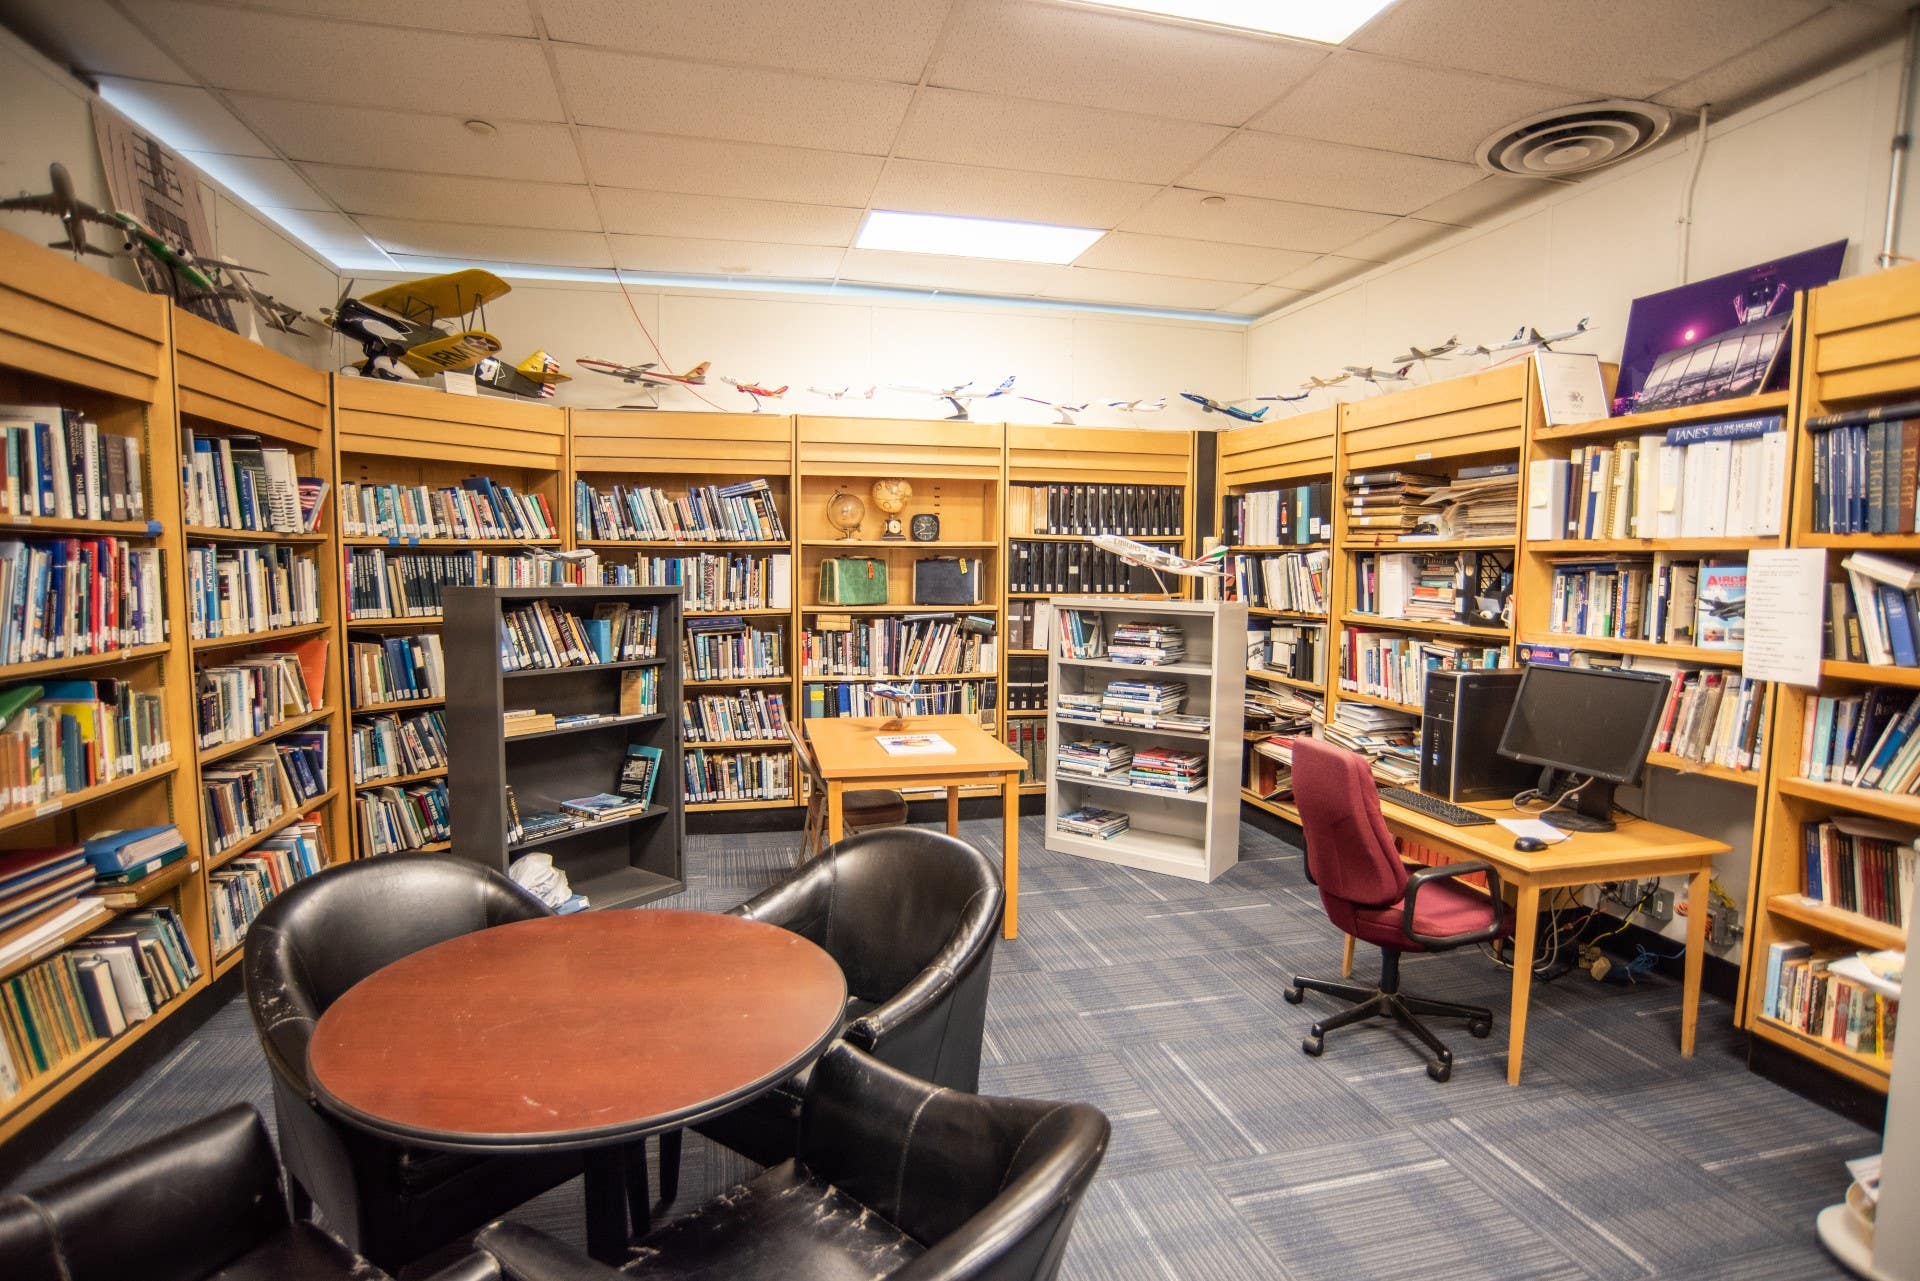 Aviation Library at the Flight Path Museum & Learning Center